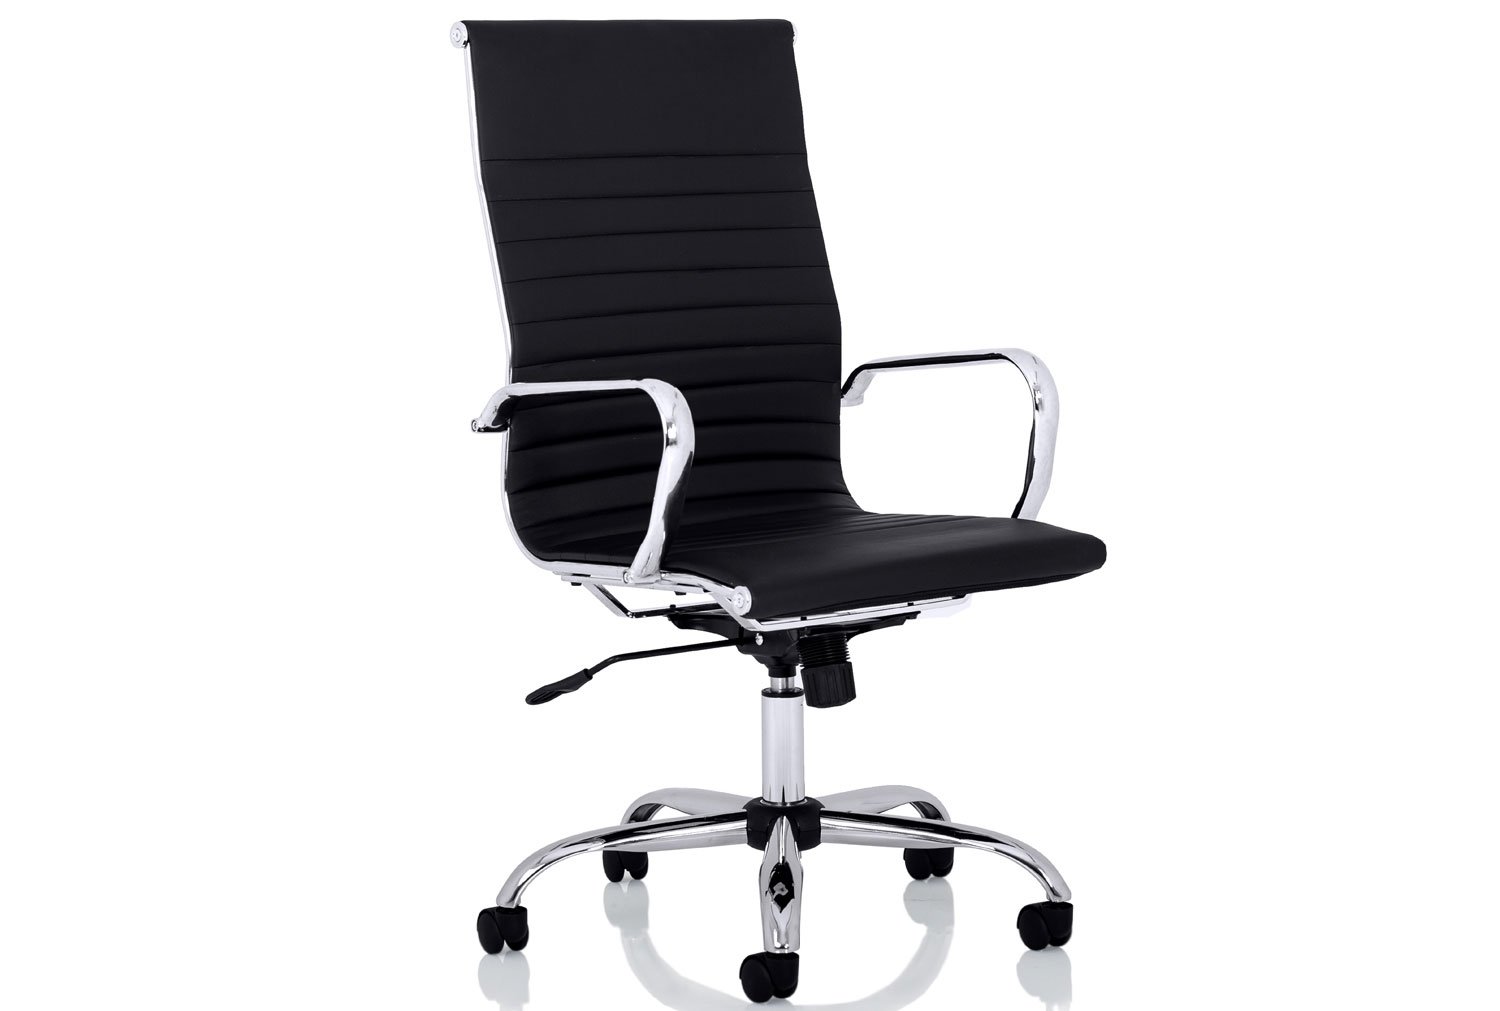 Besos High Back Bonded Leather Executive Office Chair (Black)